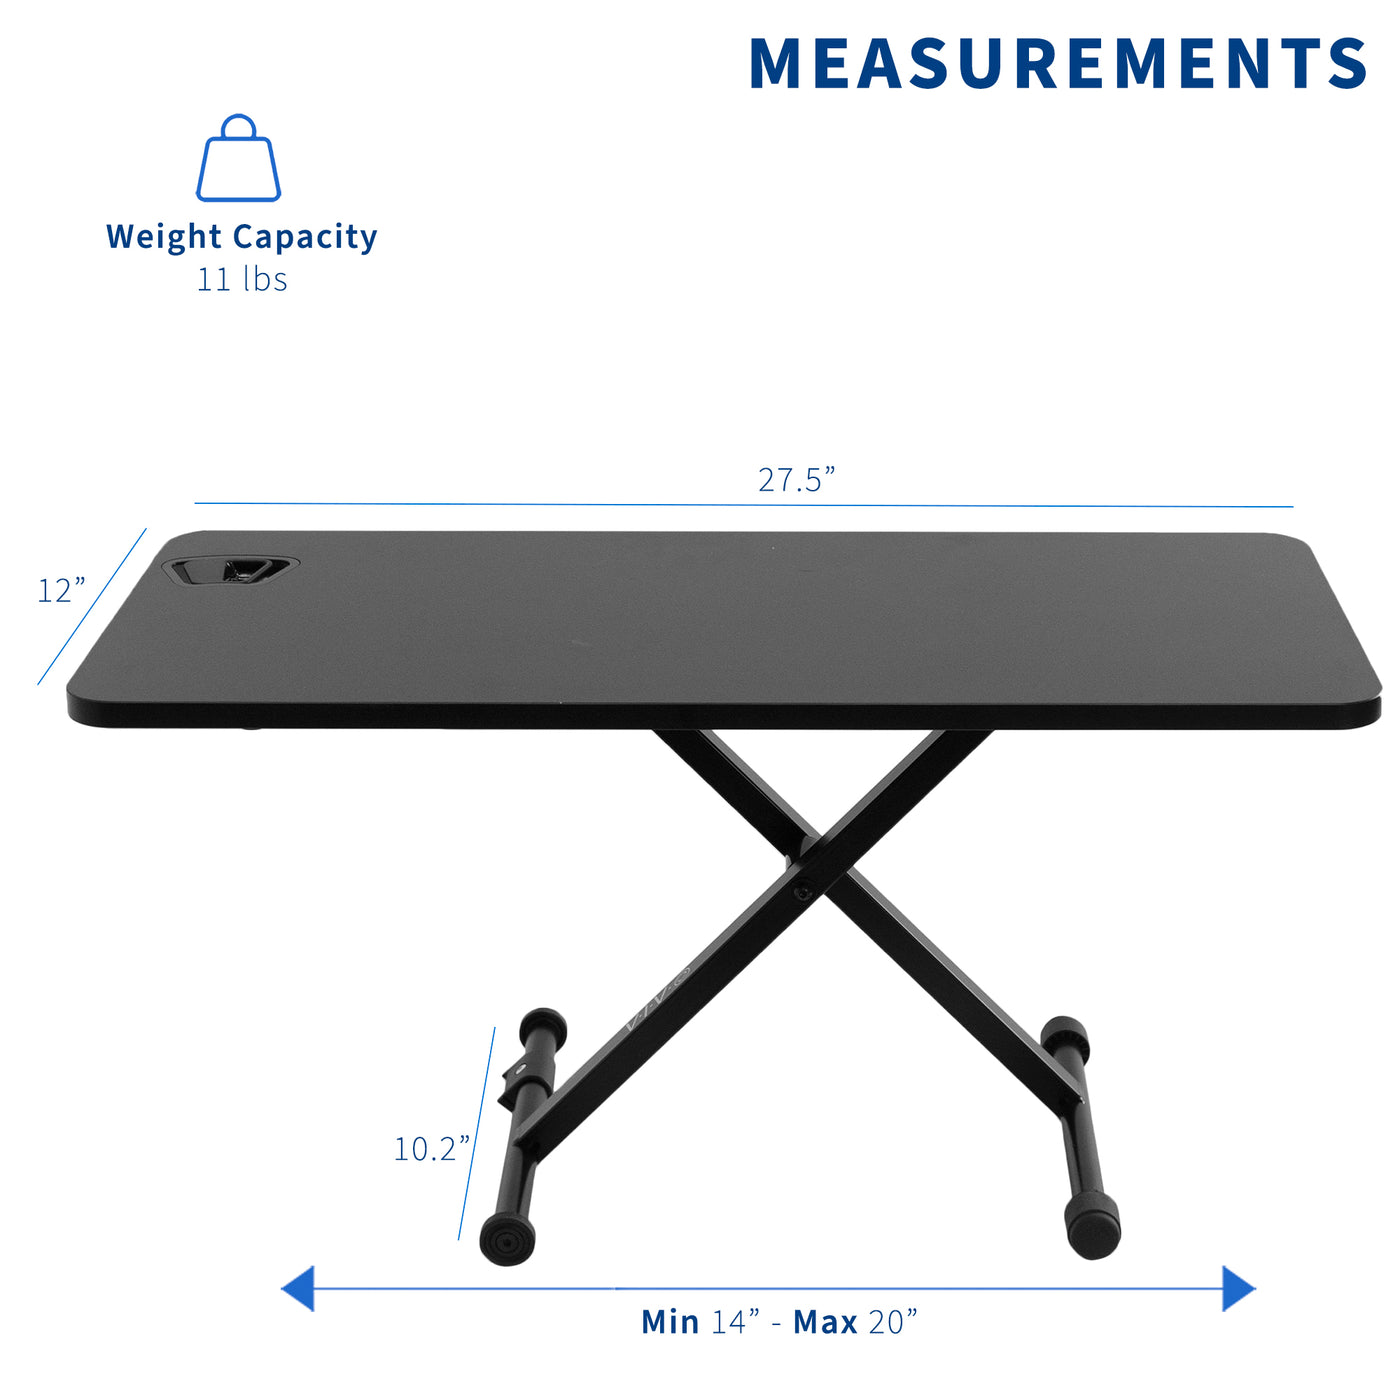 Measurements, specifications, and weight capacity that can work in small office spaces.